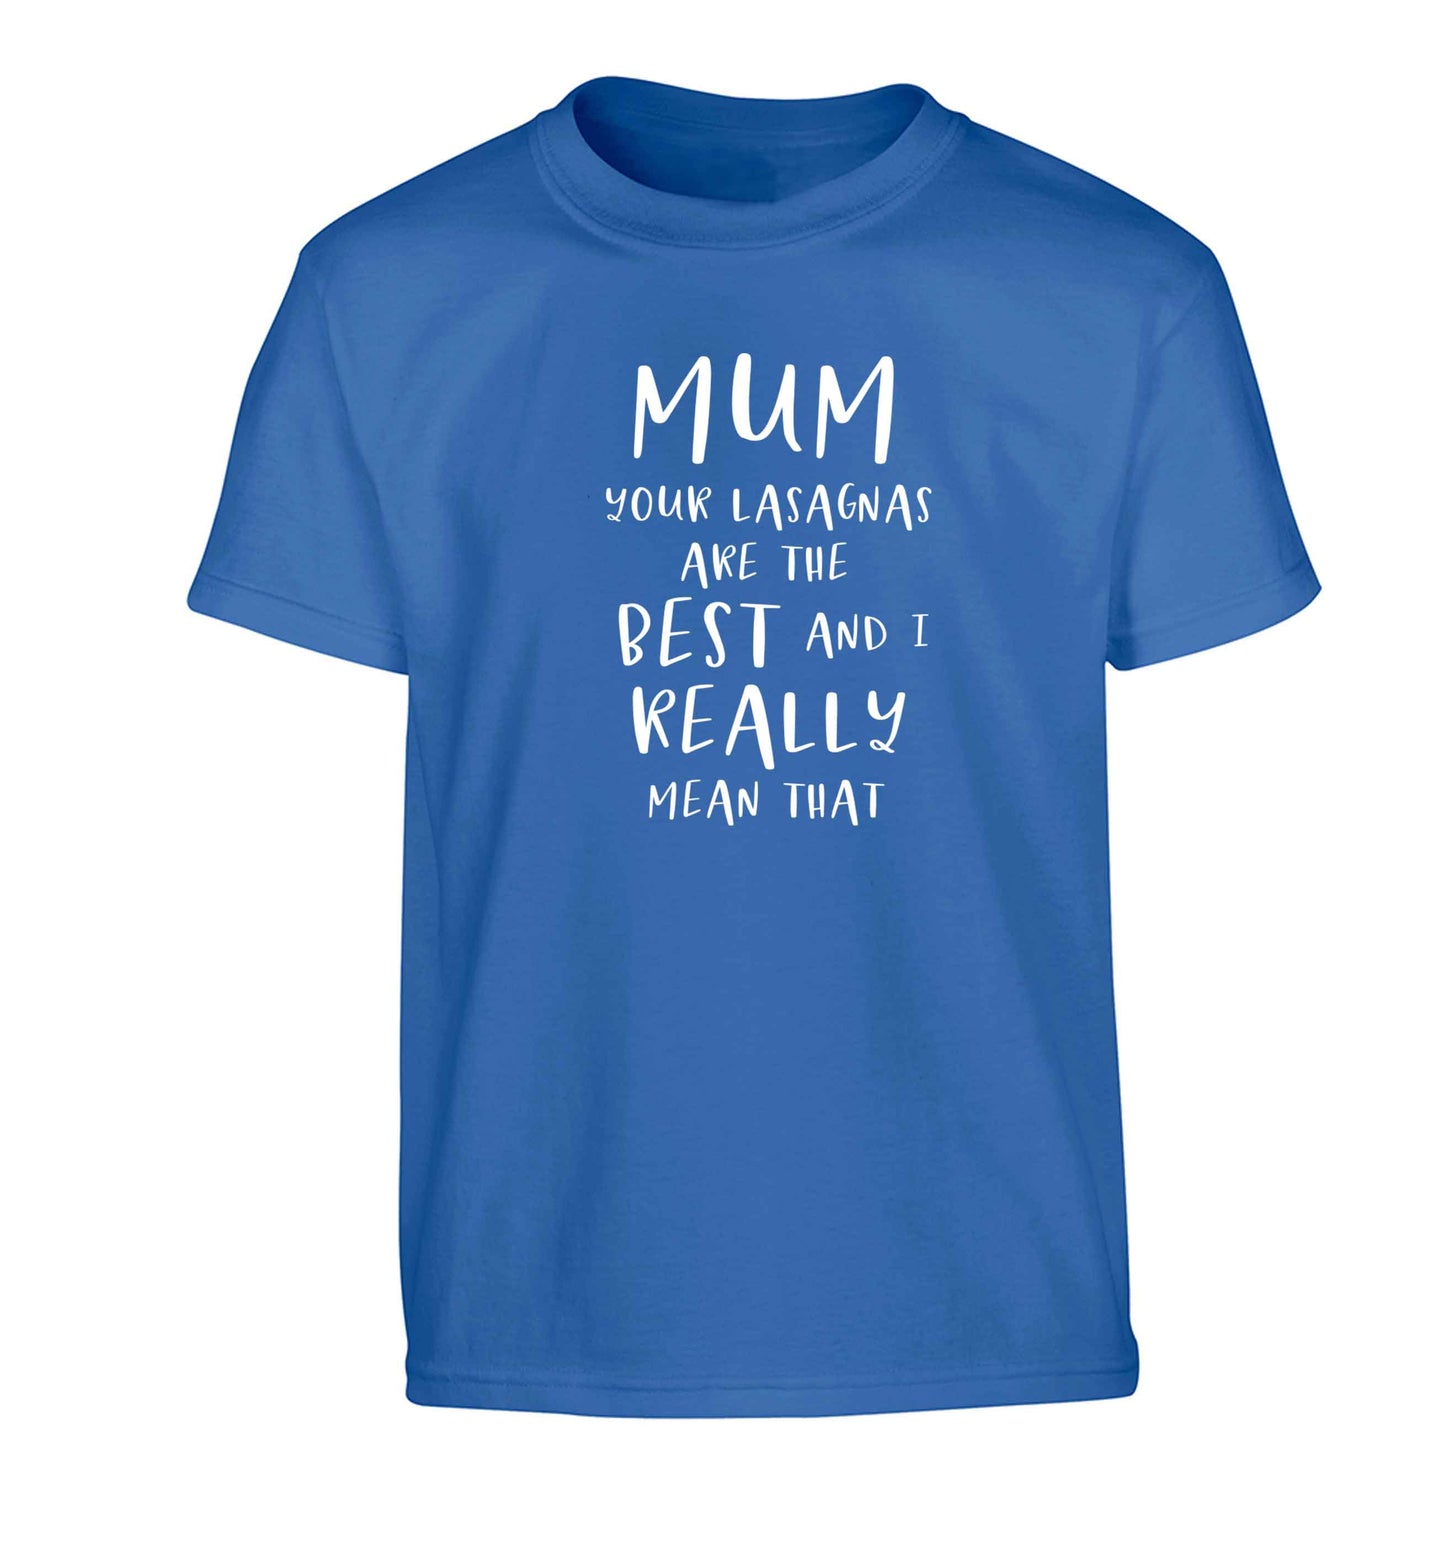 Funny gifts for your mum on mother's dayor her birthday! Mum your lasagnas are the best and I really mean that Children's blue Tshirt 12-13 Years